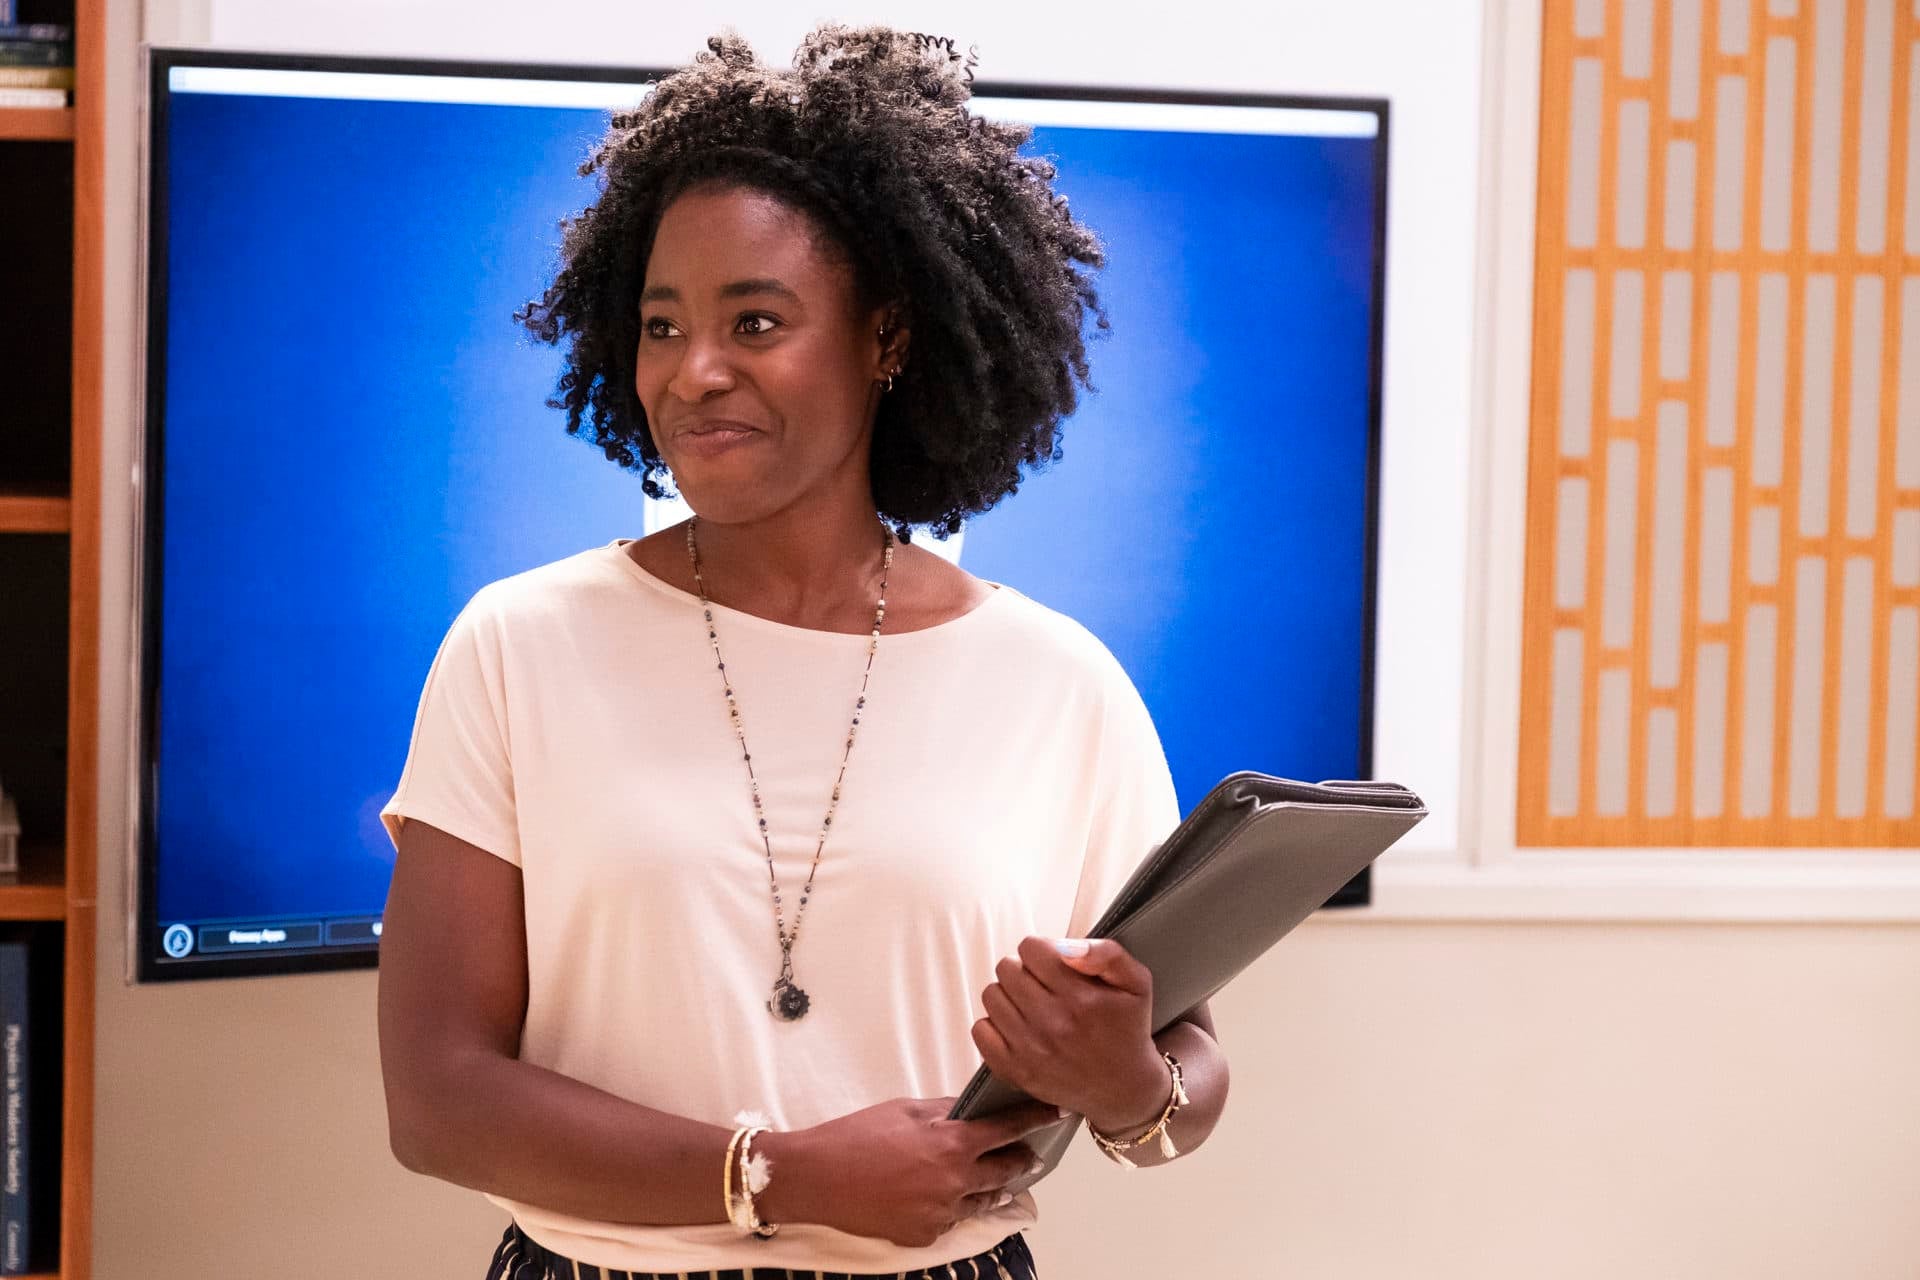 ‘Killing Eve’s’ Kirby Howell-Baptiste Says Her Hollywood Journey Has Been A ‘Surprise’